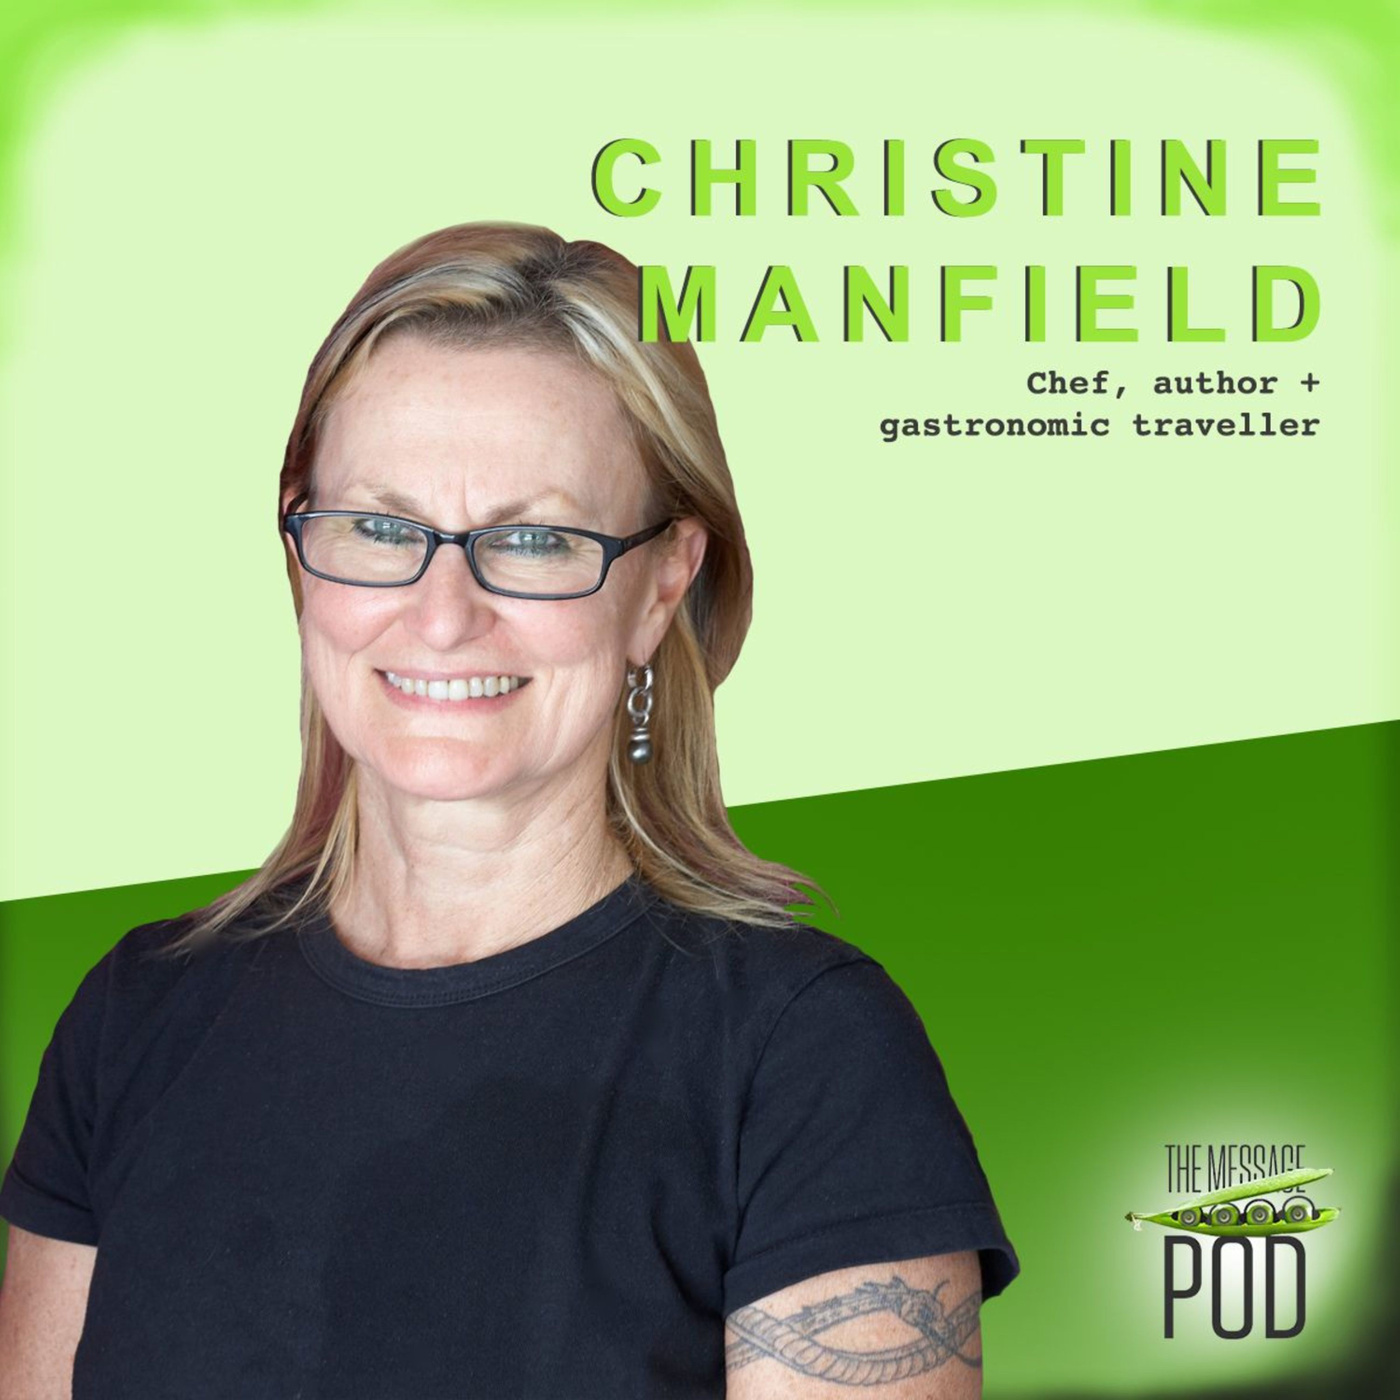 #62 Christine Manfield - celebrated chef, author and gastronomic traveller